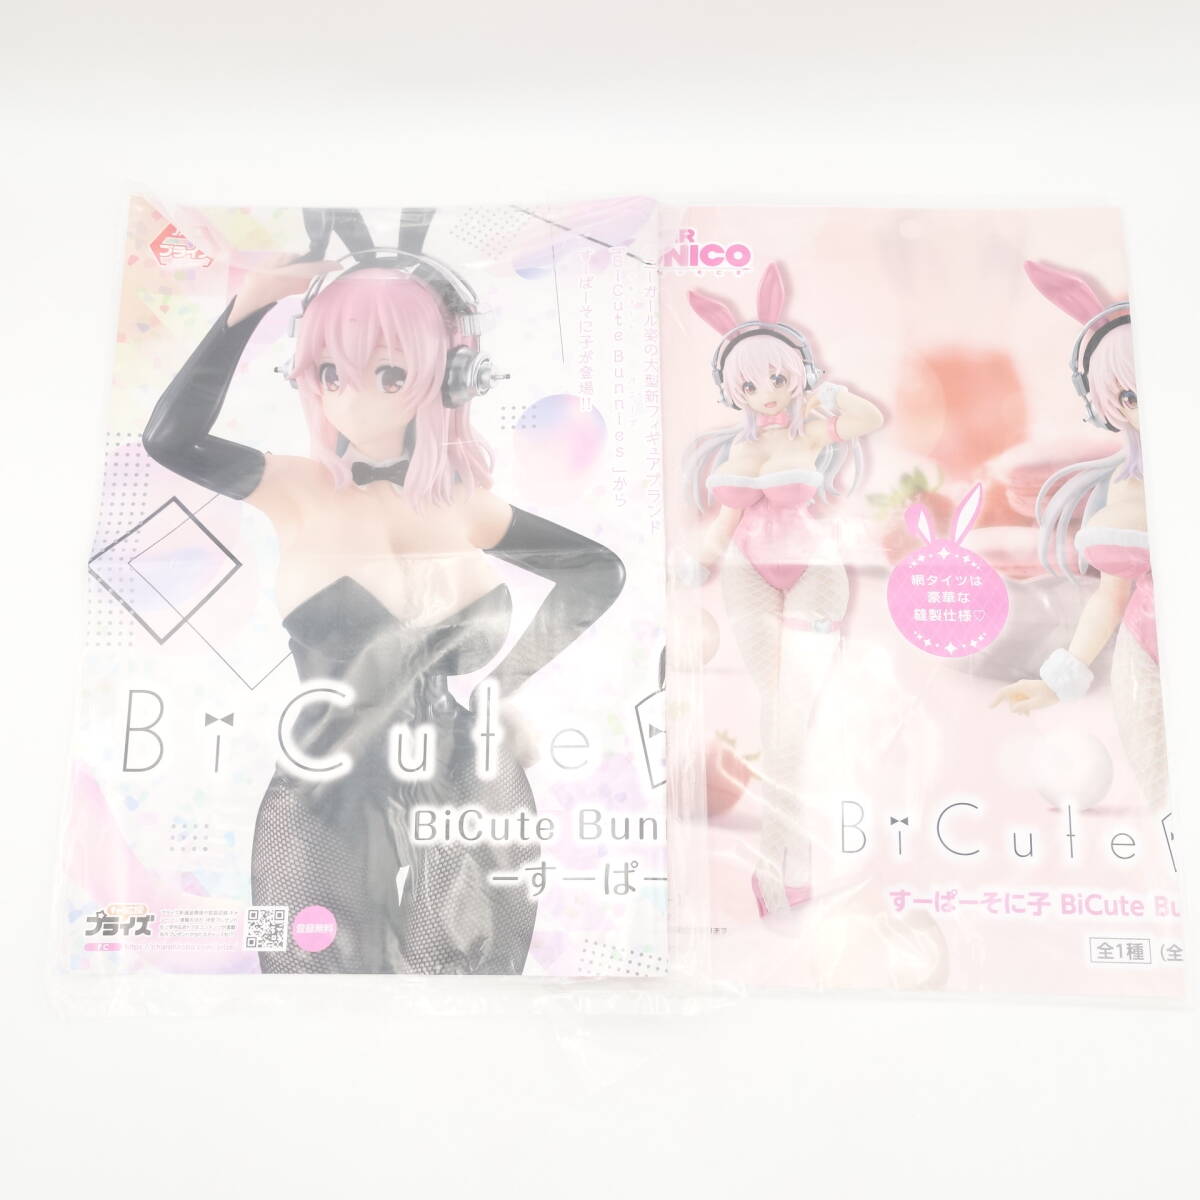  Super Sonico BiCute Bunnies Figure pink black .. poster only 2 pieces set f dragon FuRyu prize not for sale /15014